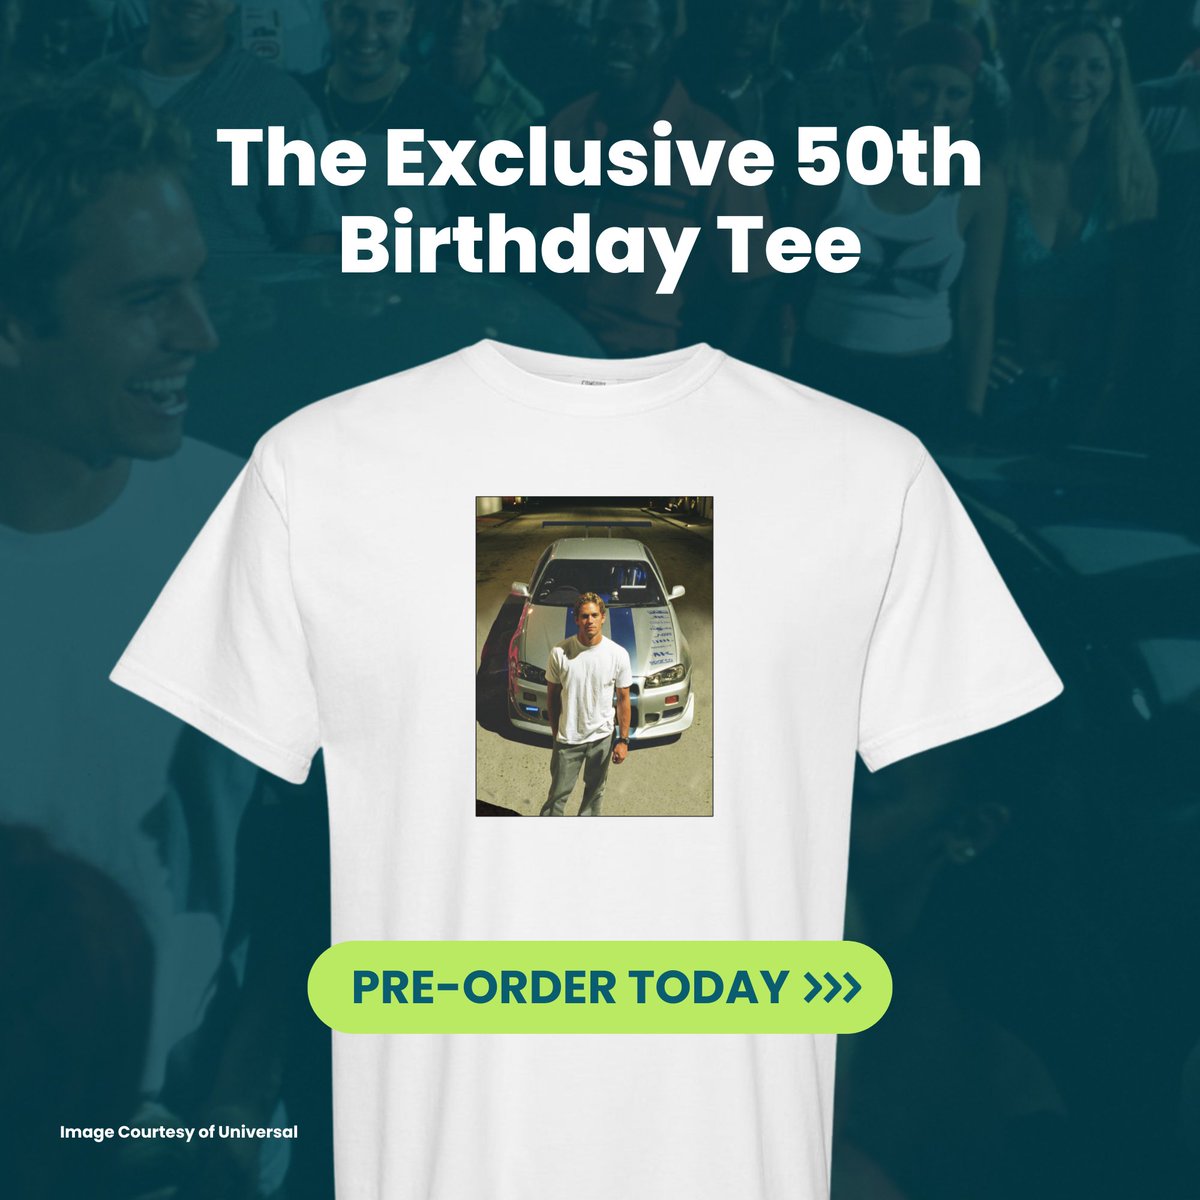 ✨The Exclusive 50th Birthday Tee is still available for pre-order! Profits fuel our mission to DO GOOD.® and support our scholarship program. Since 2014, we've grown and provided scholarships all over the country. Support us today. Link in bio. Image courtesy of Universal.